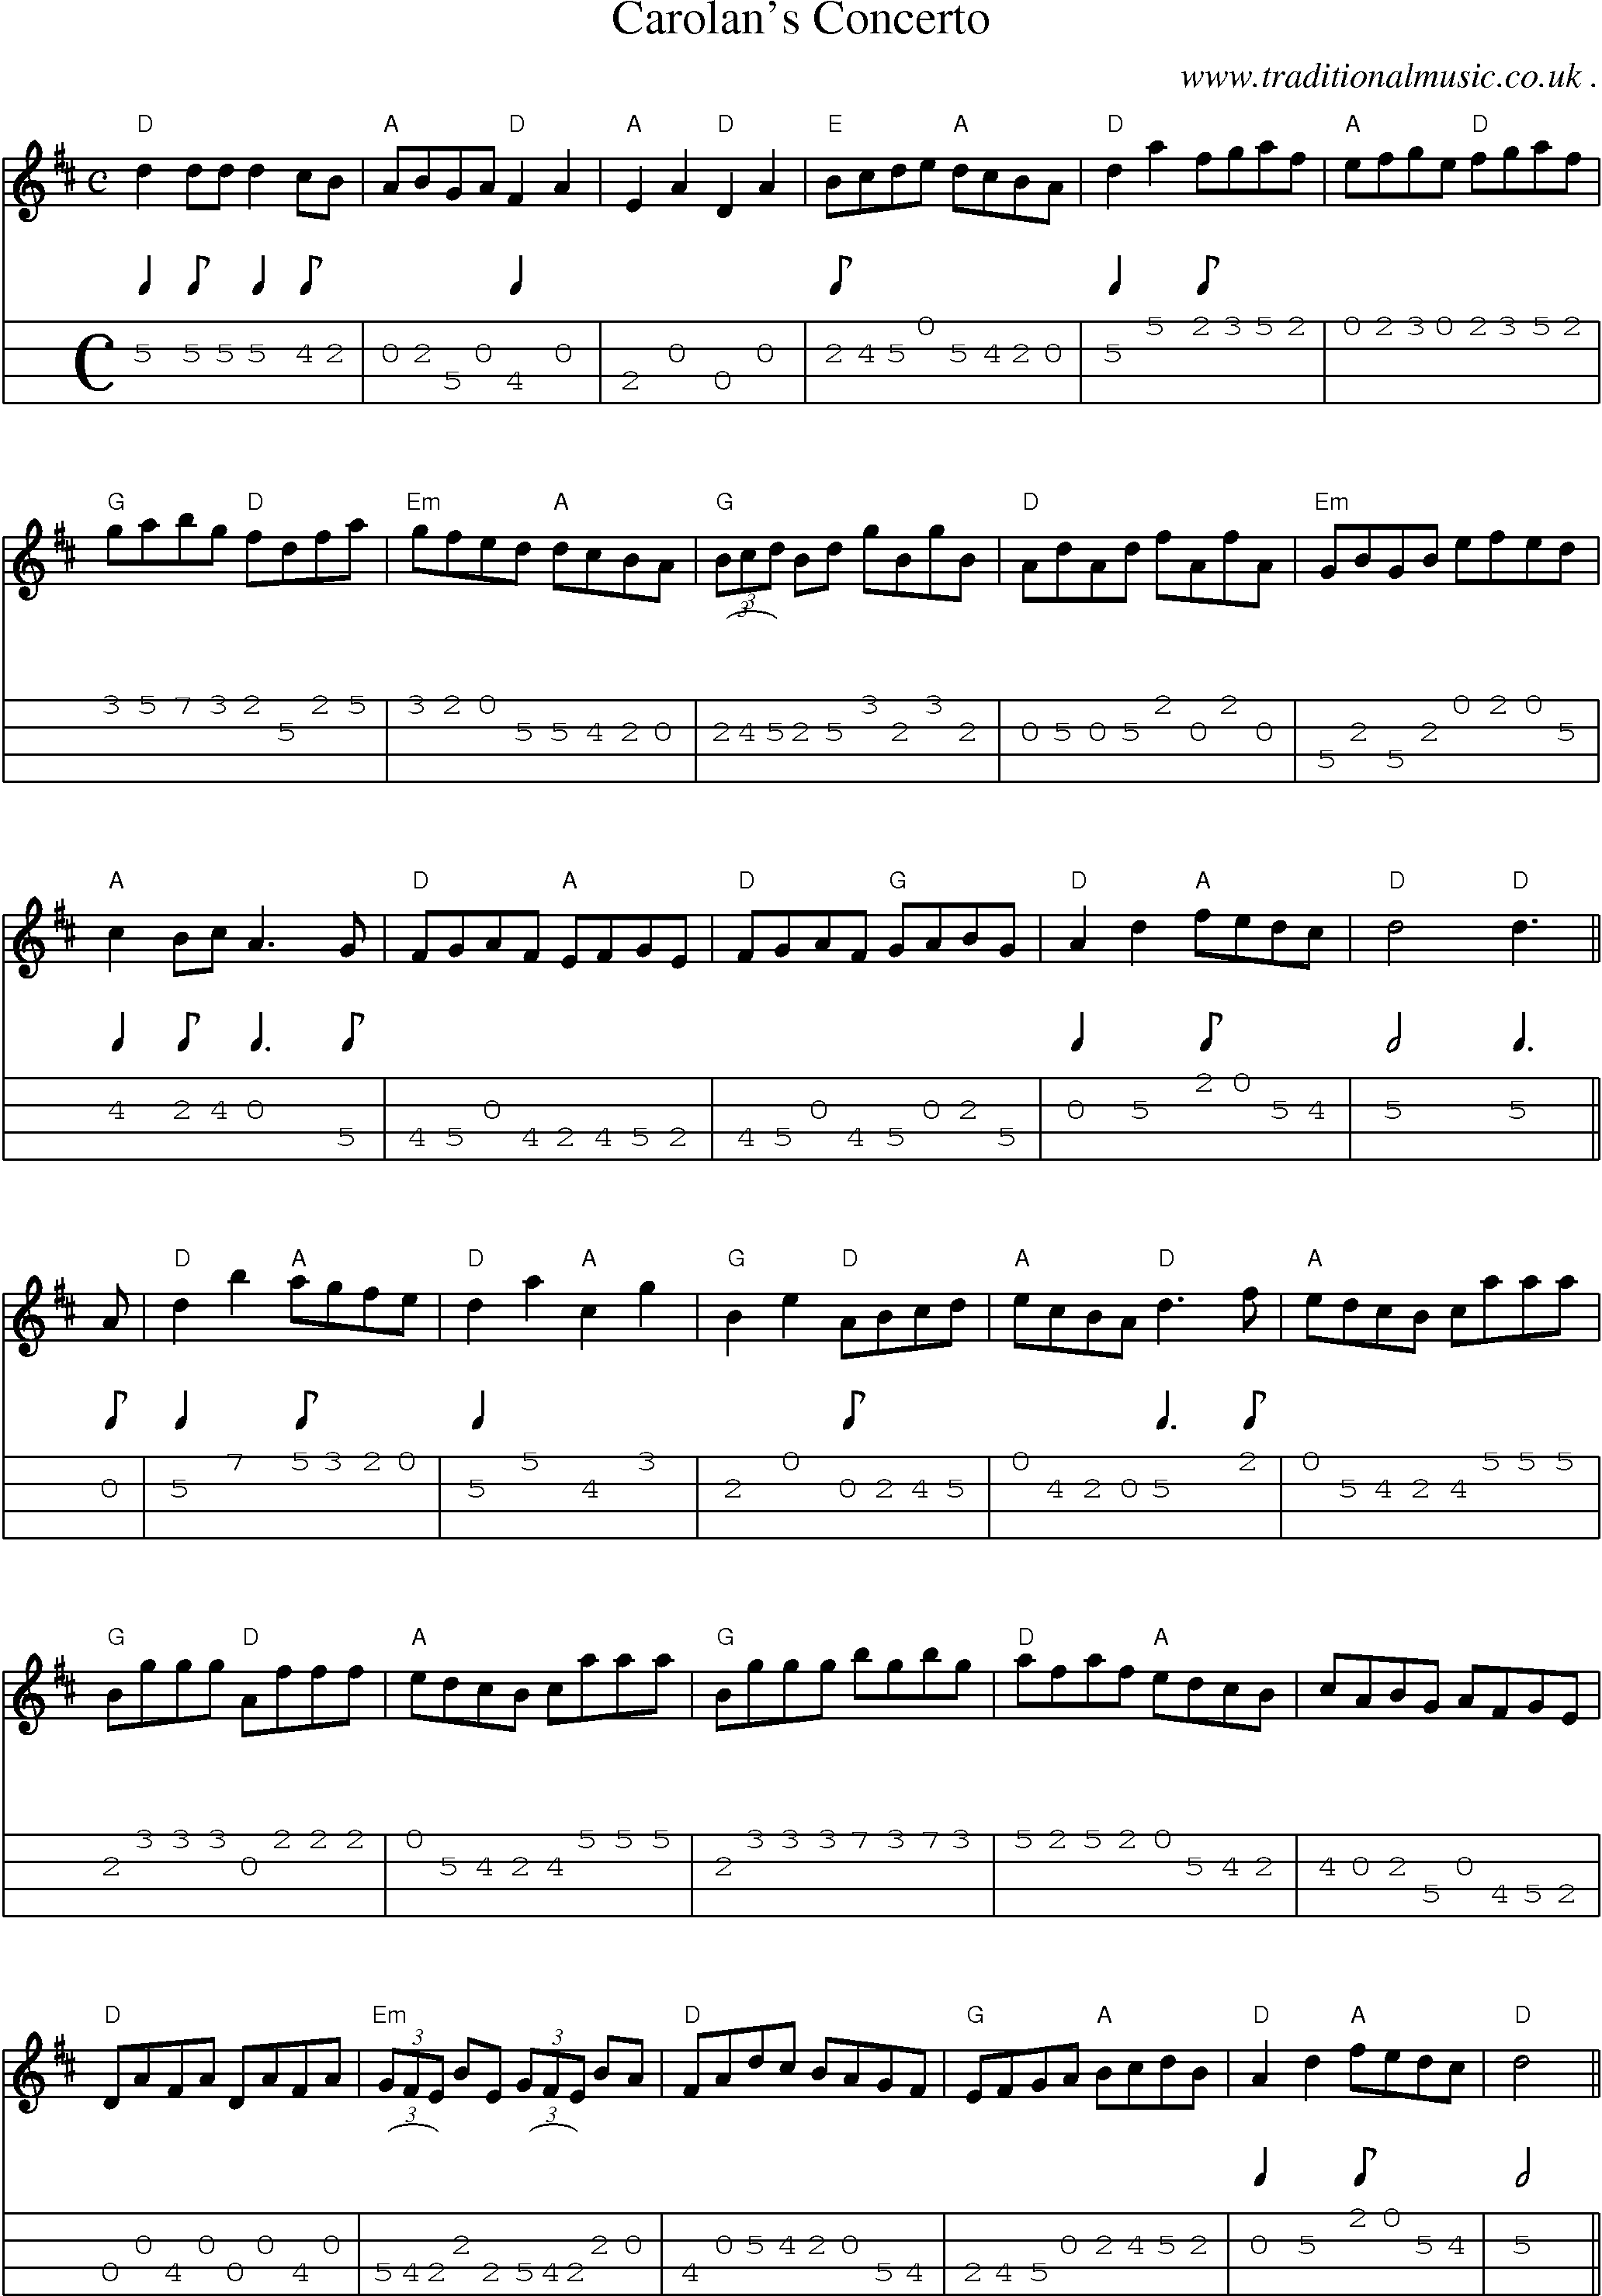 Music Score and Guitar Tabs for Carolans Concerto